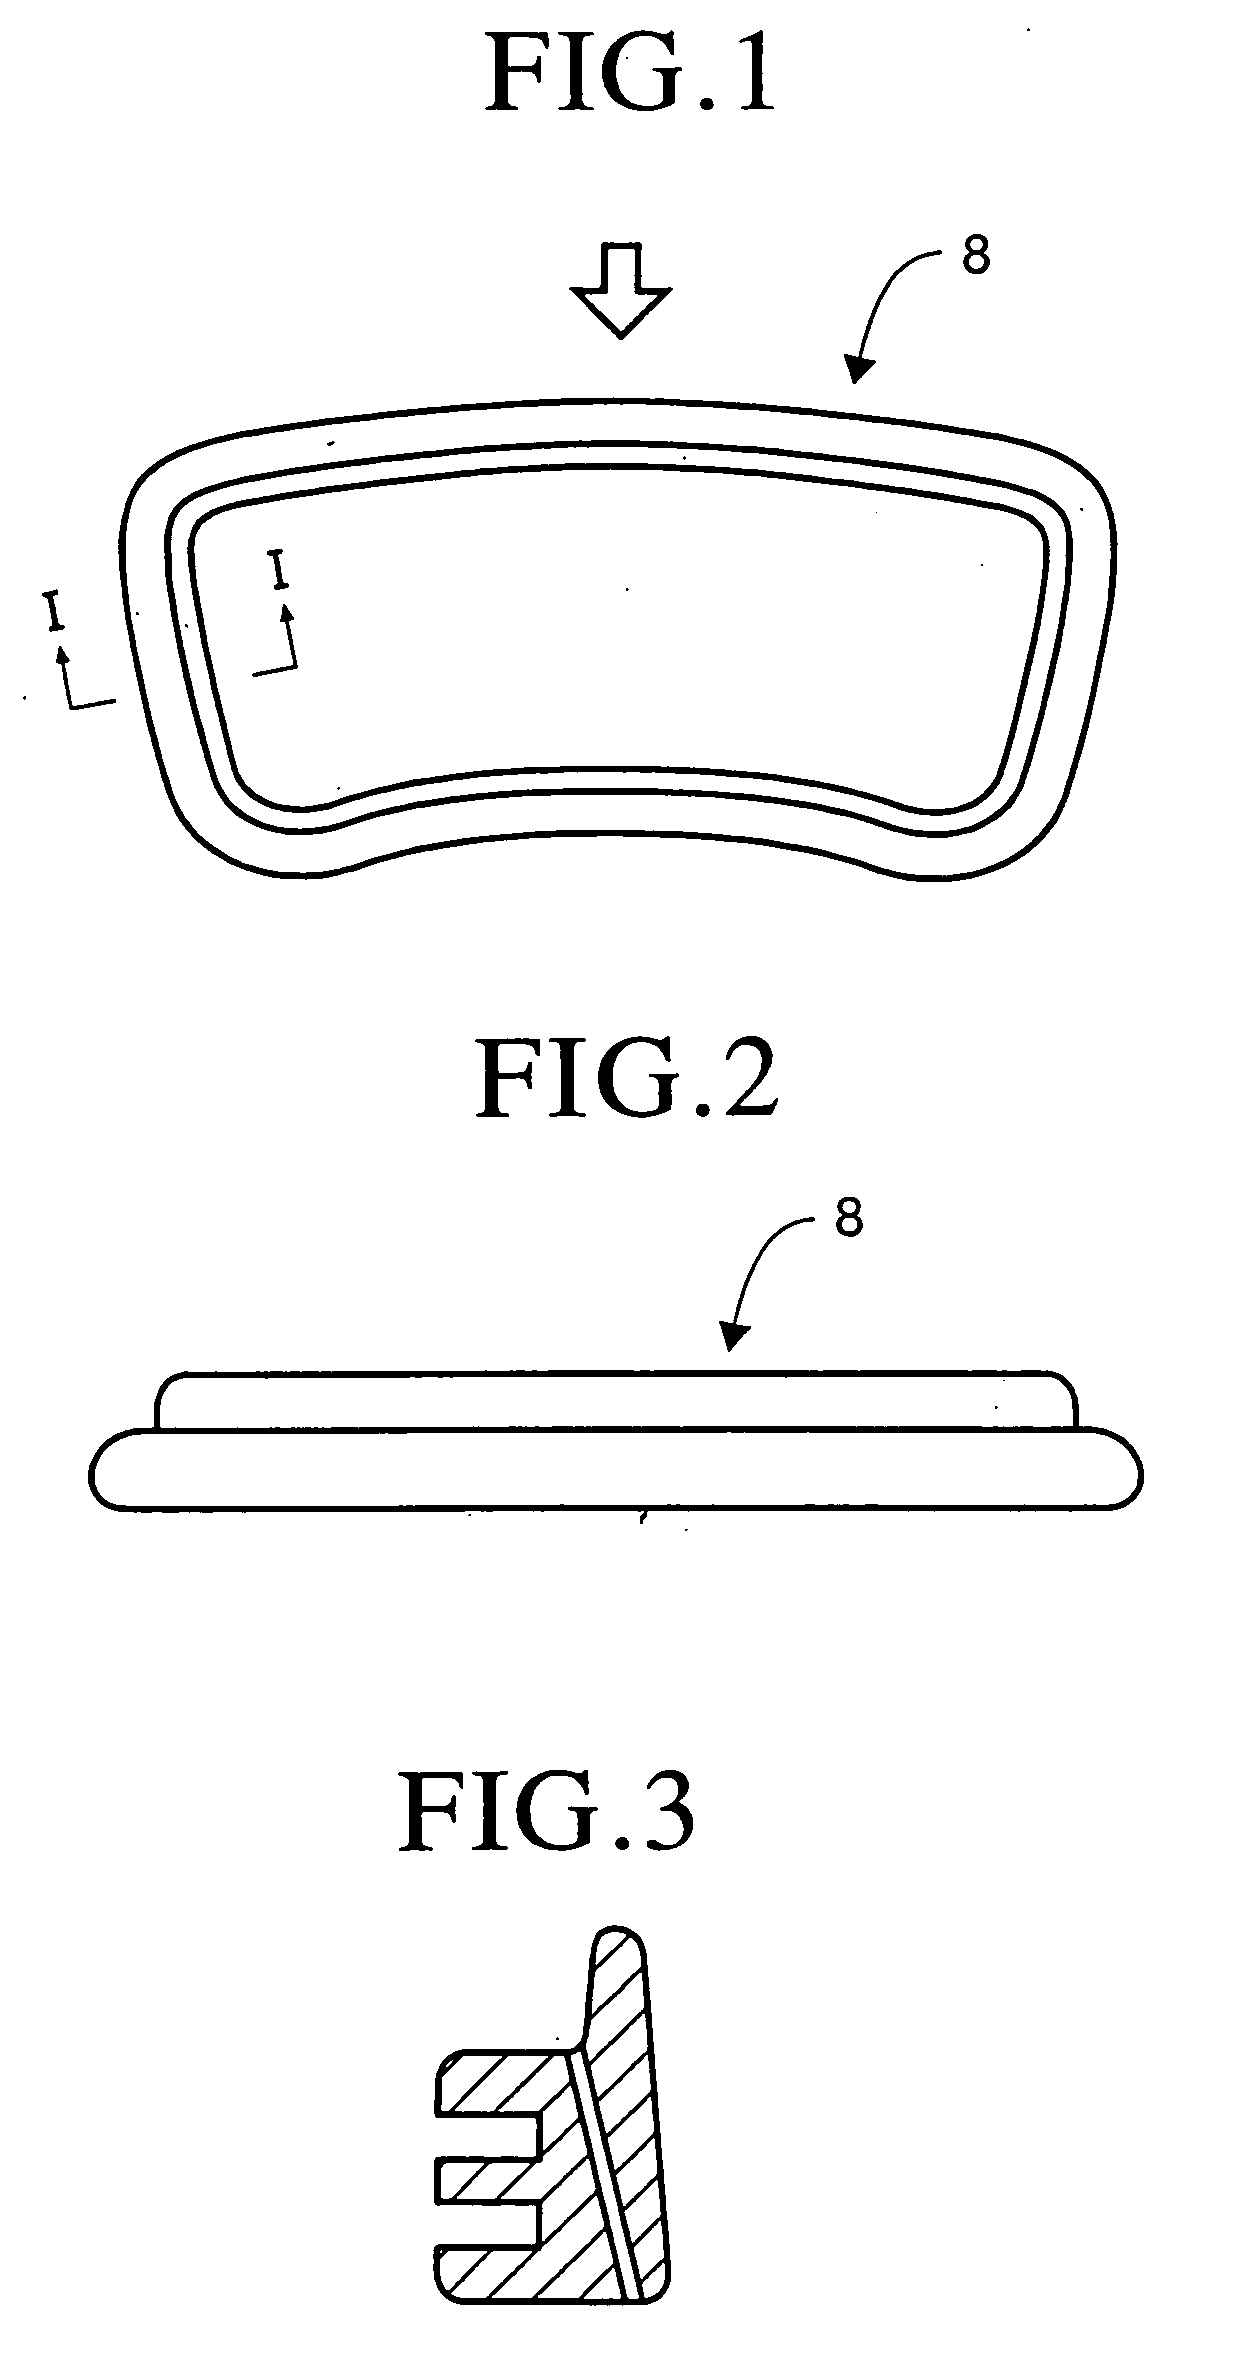 Method of producing polygonal ring-shaped machine parts having complex cross-section